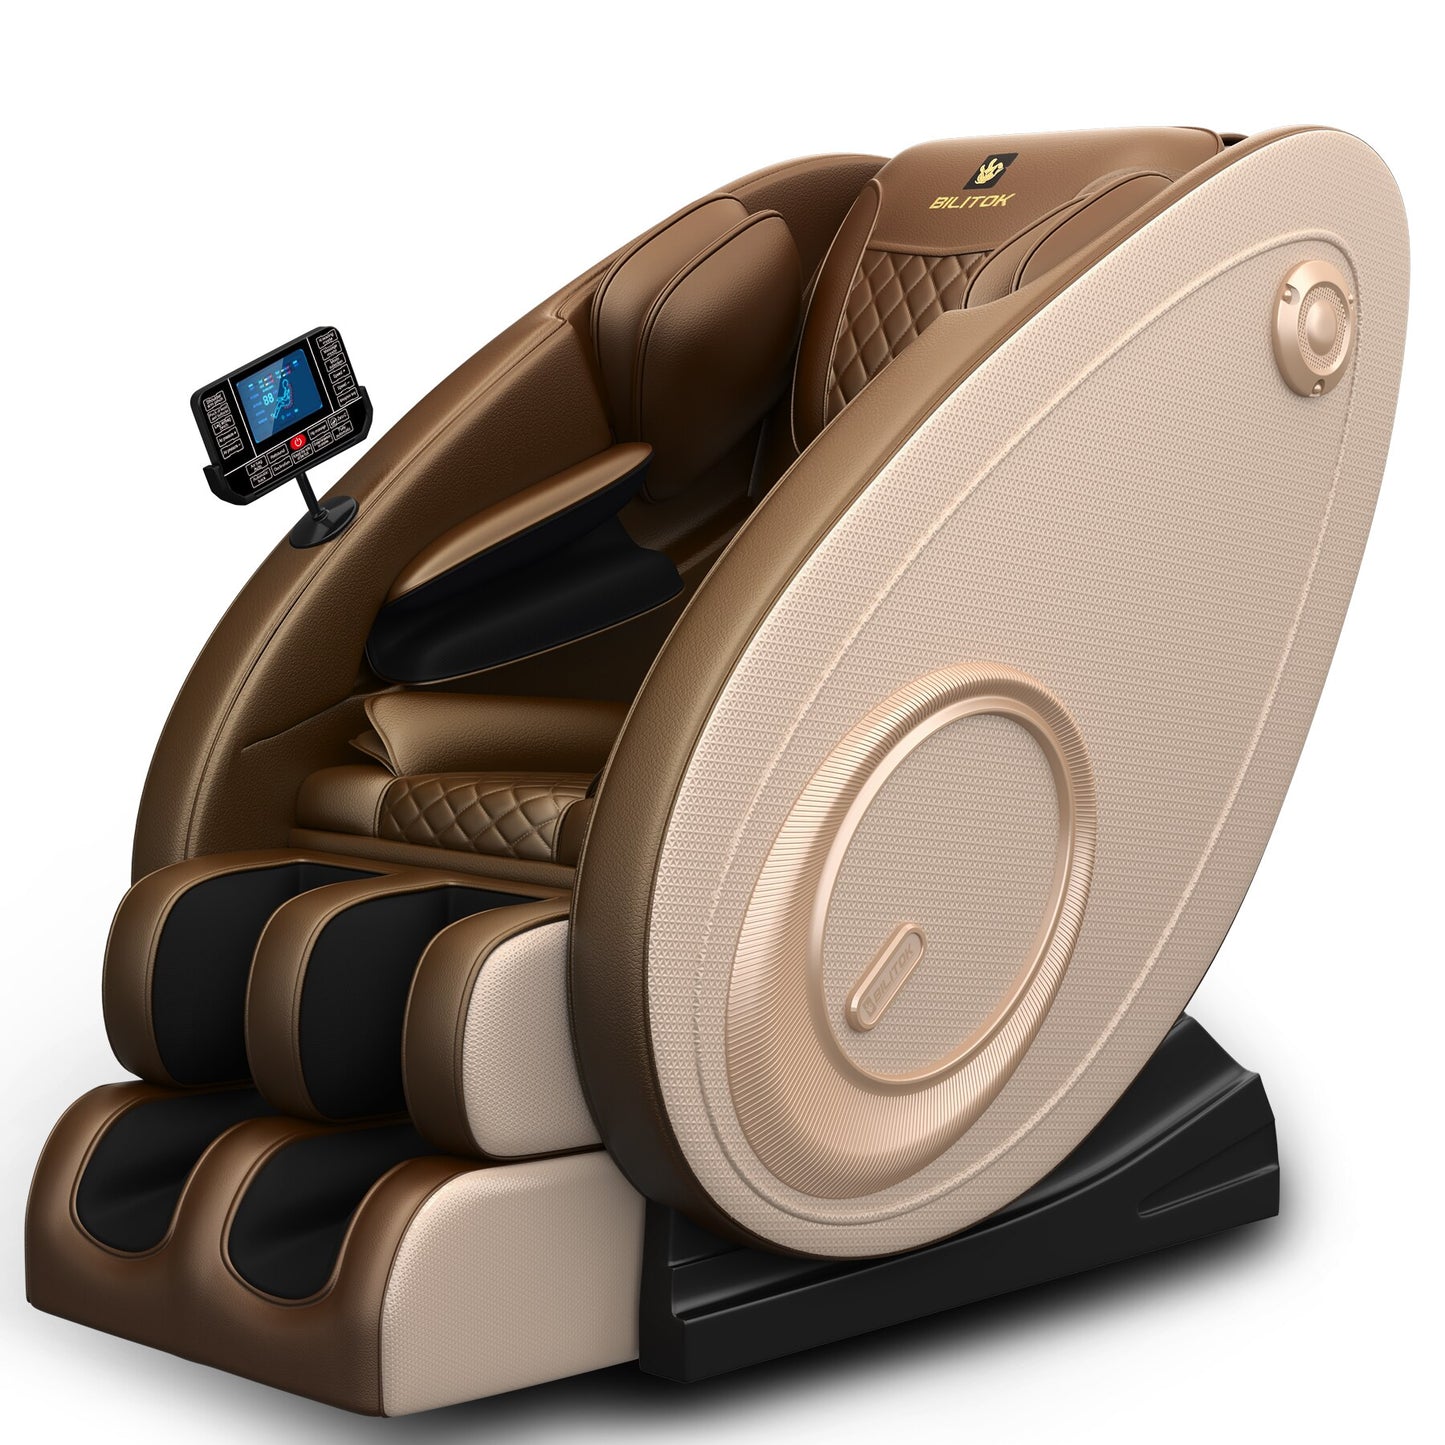 Full Body Massage Chair with Heating, Massage Chair Recliner with Zero Gravity, Bluetooth Speaker, Airbags, Foot Roller